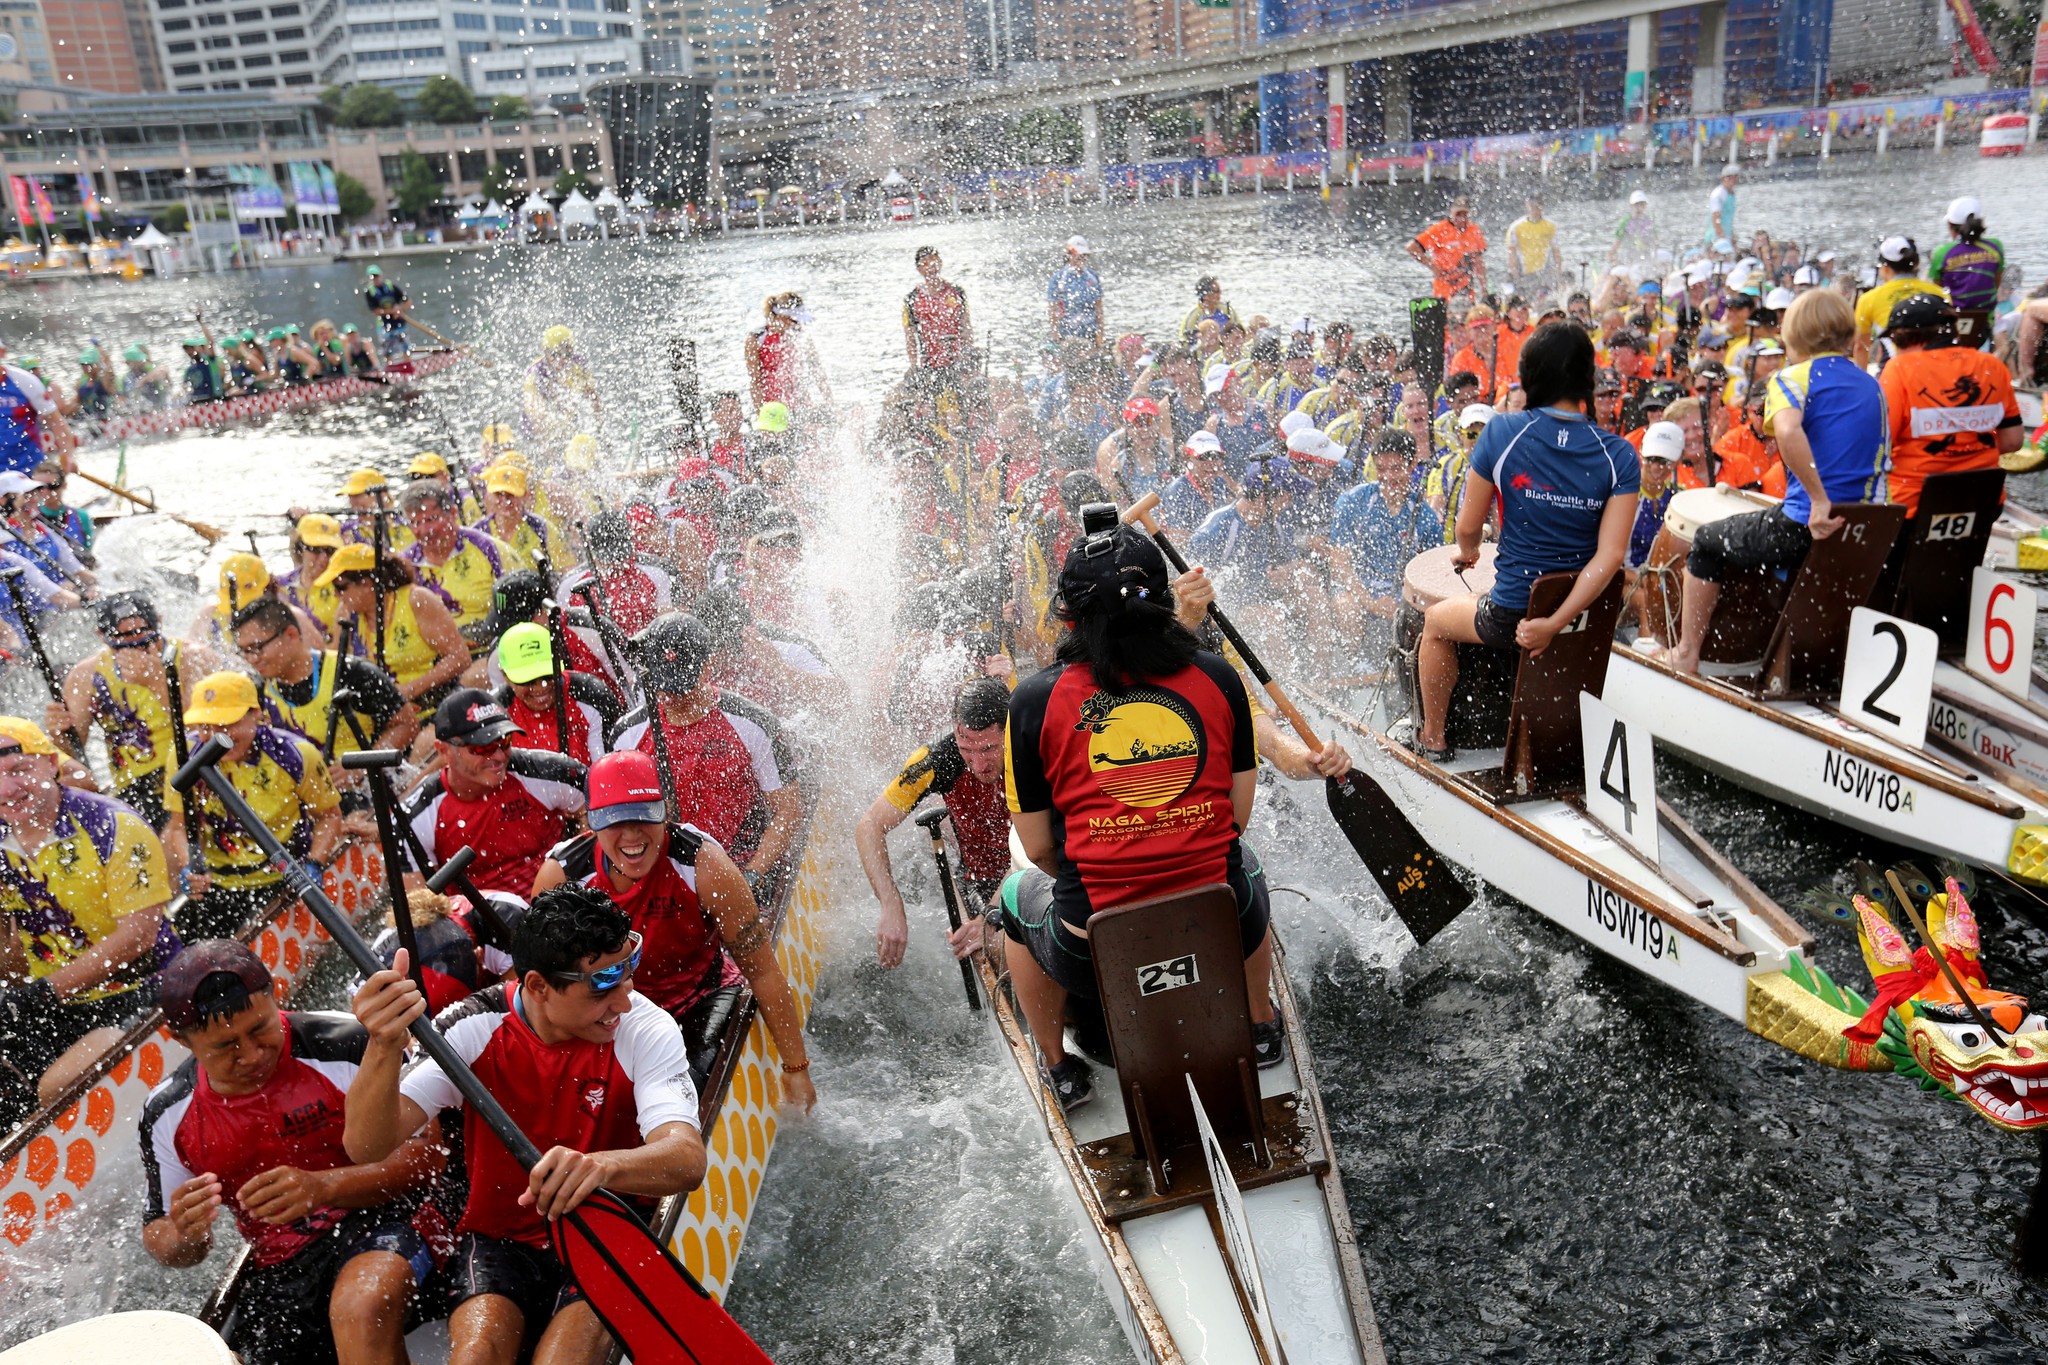 Sydney’s Dragon Boat races roar in the Year of the Tiger